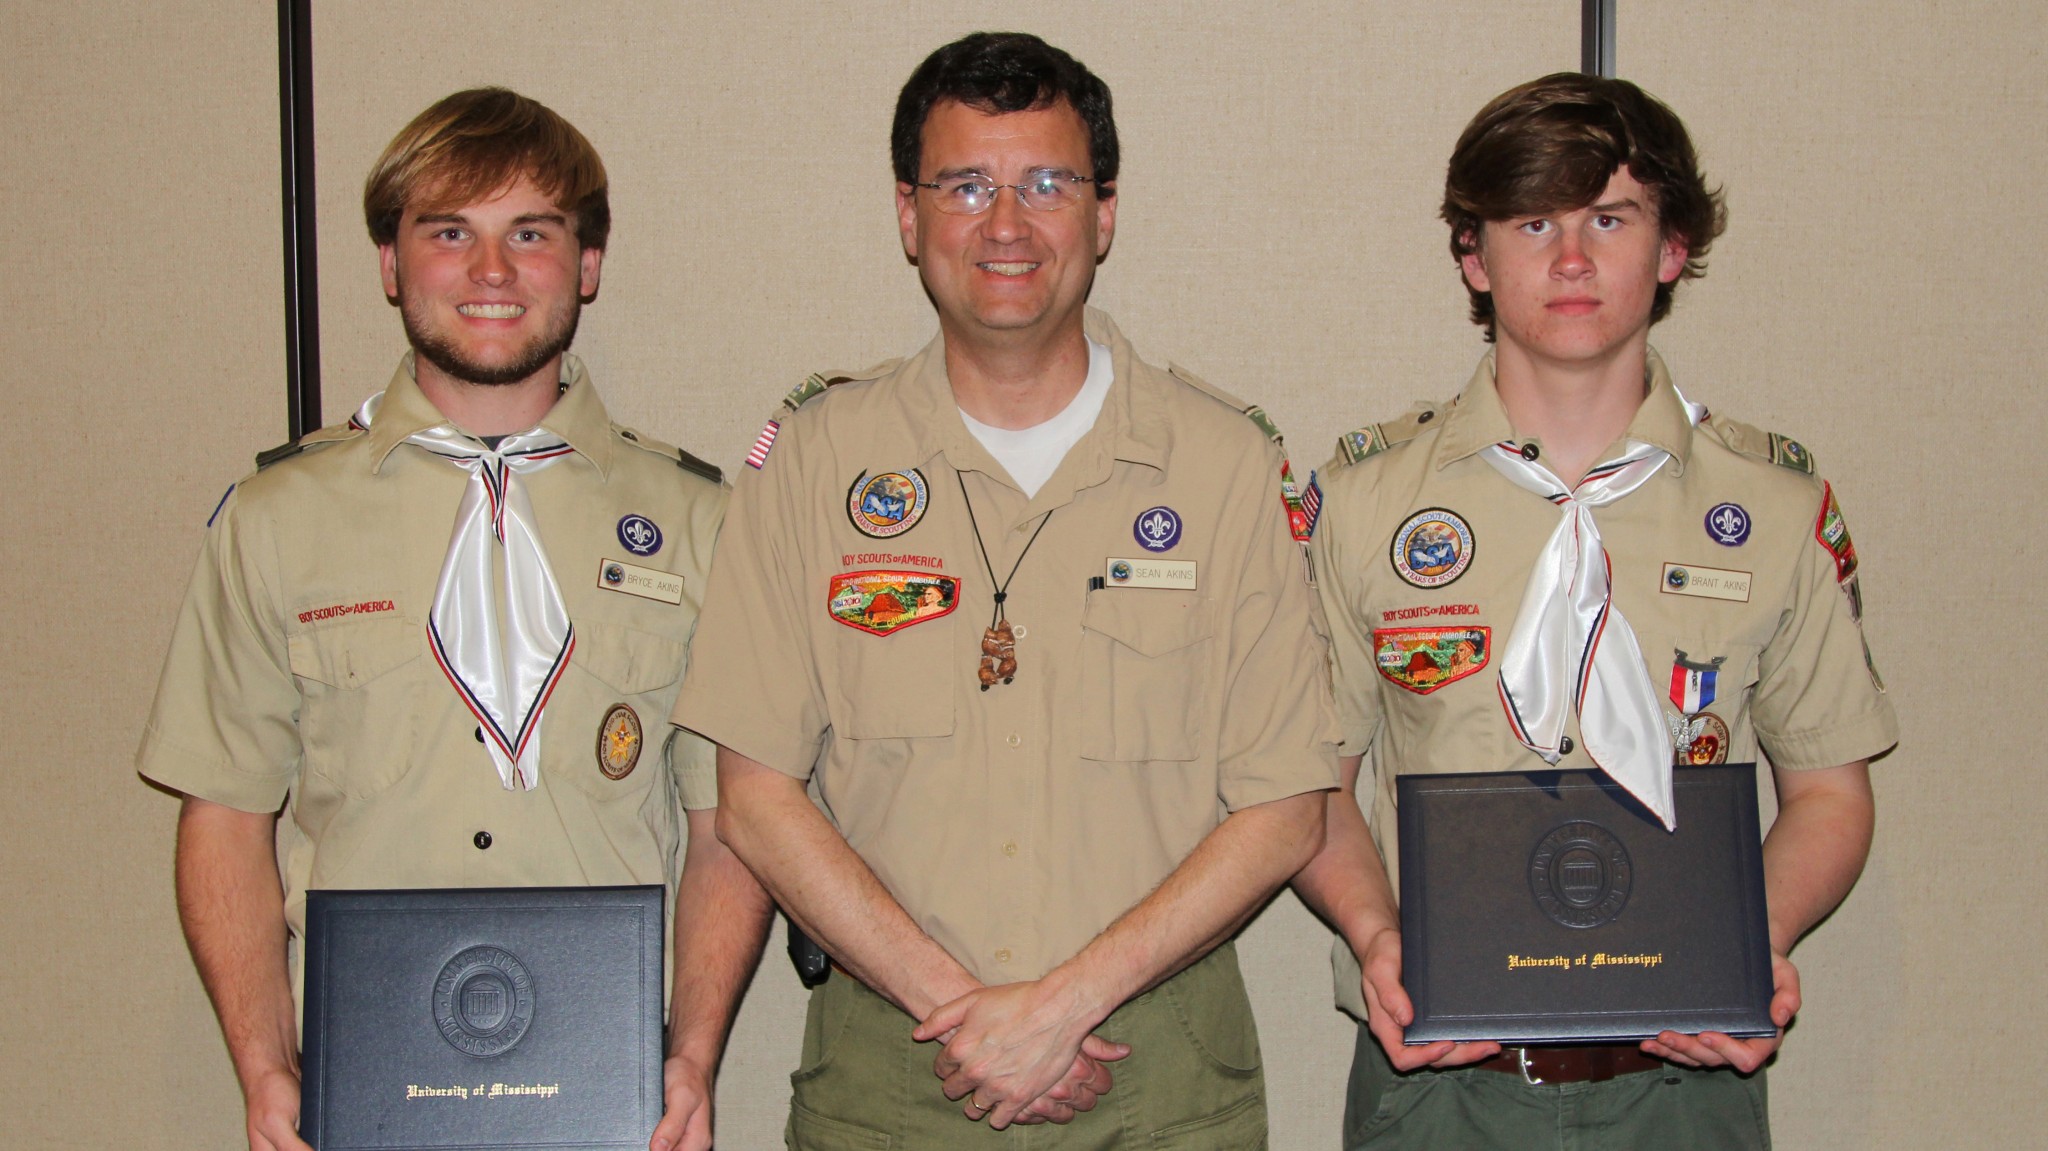 Brothers Bryce Akins (left) and Brant Akins (right), accompanied by their father and scoutmaster, Sean Akins, show off their Eagle Scout scholarship awards from the University of Misissippi at the Yocona Area Council's recent Youth Recognition Banquet. The Ripley natives, members of Troop 38, both plan to attend Ole Miss. Photo by Mitchell Diggs